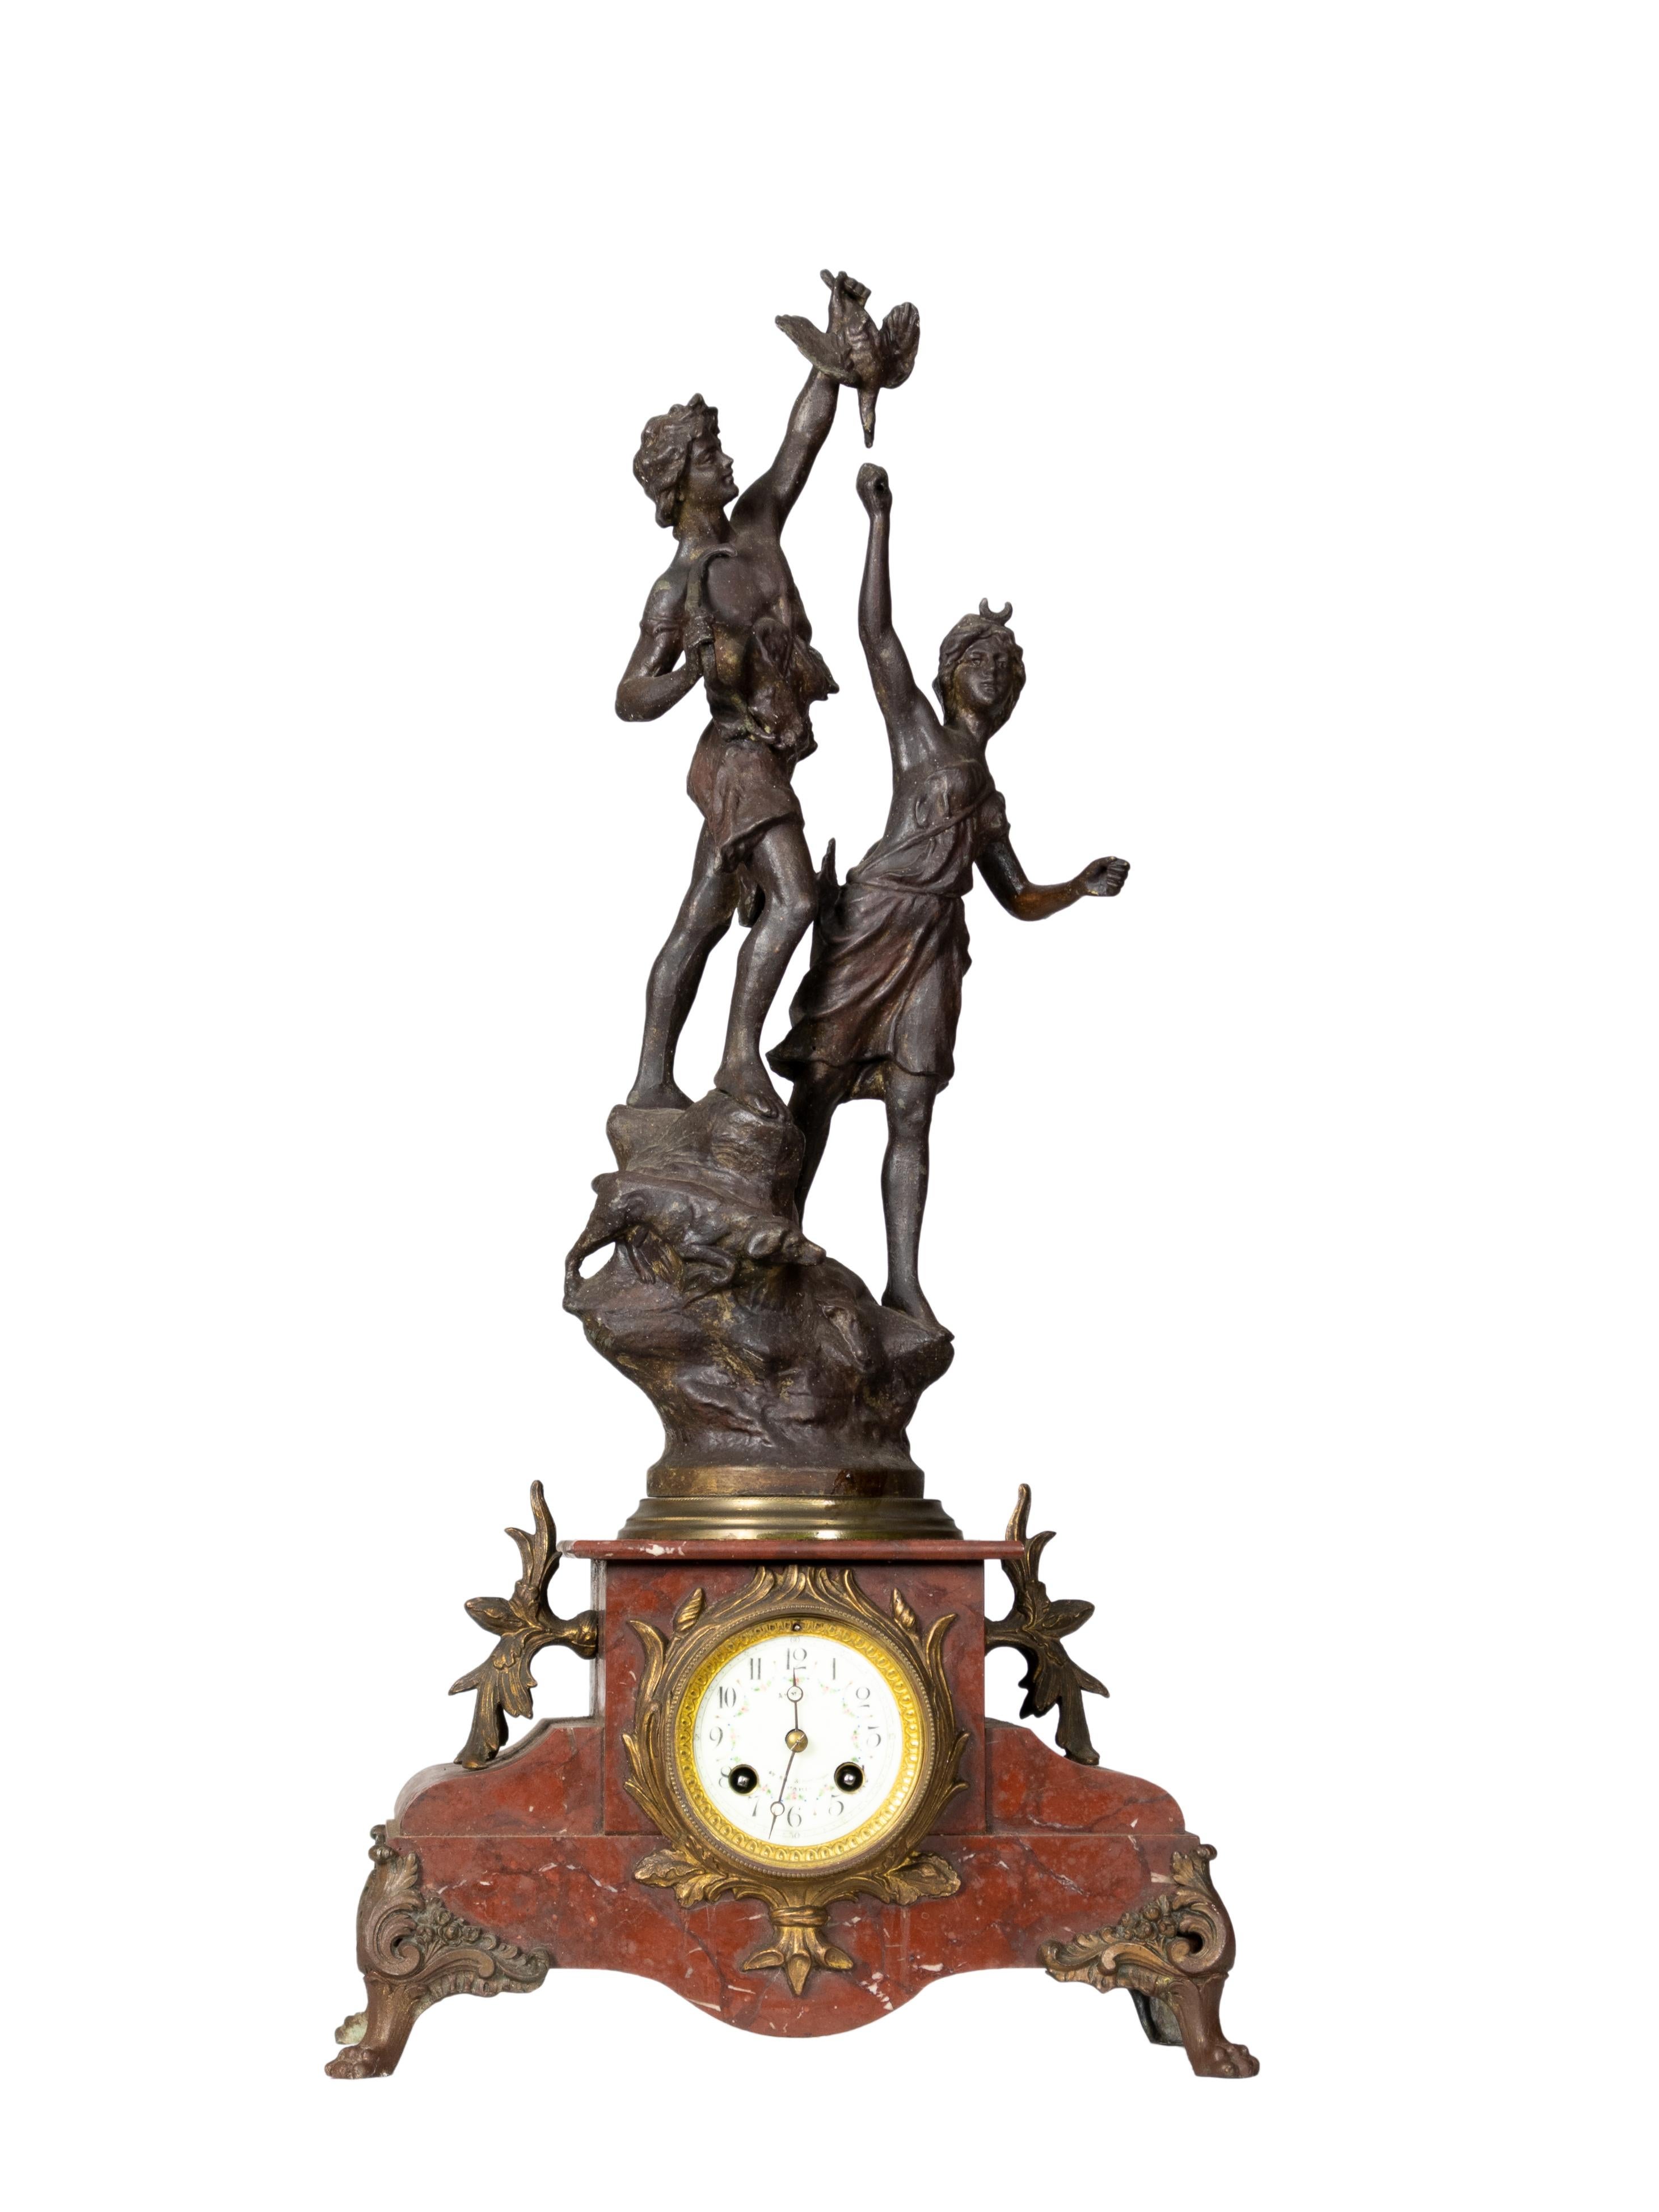 A complete and in working order metal mantel clock with an esteemed figure of the Roman Goddess Diana the Huntress with a nymph by her side, with Carrara marble details and a functioning swiss mechanism. 
Recently reviewed by a master clockmaker.
